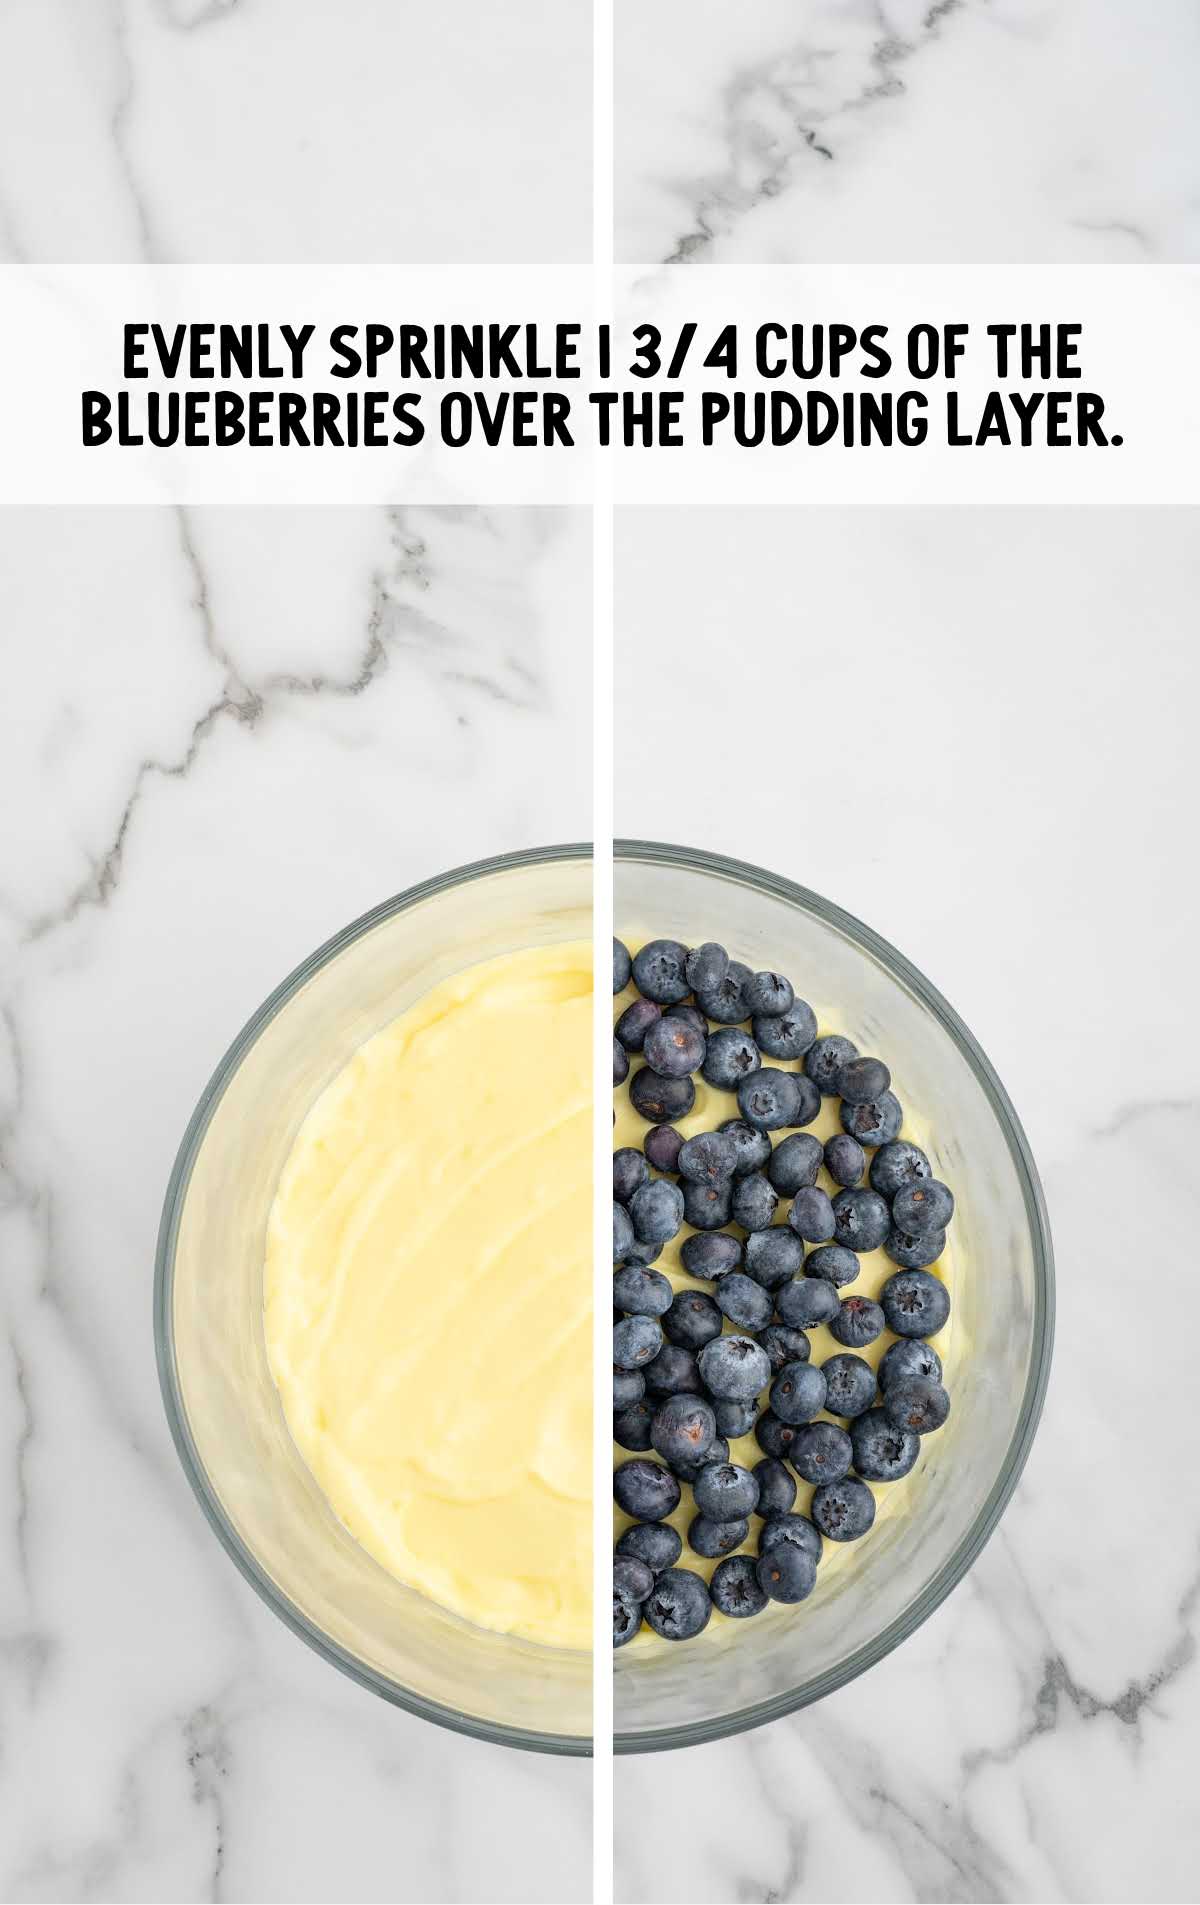 blueberries sprinkled on top of the pudding layer